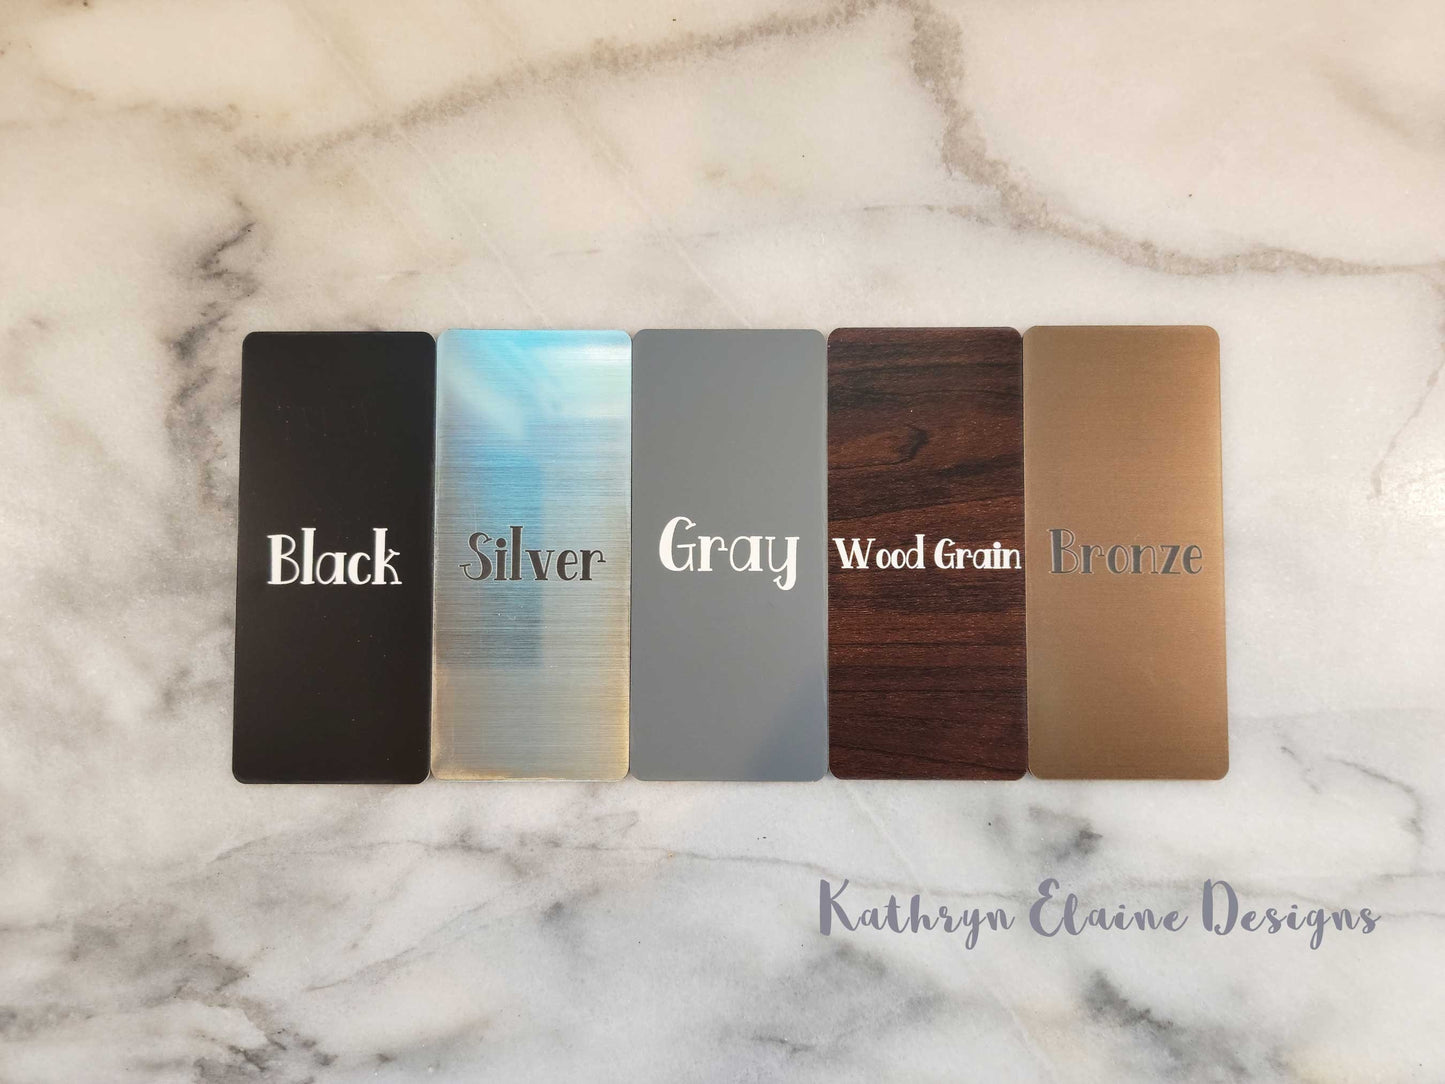 5 laminate color choices: black with white lettering, silver with black lettering, gray with white lettering, wood grain with white lettering, and bronze with gray lettering on marble background